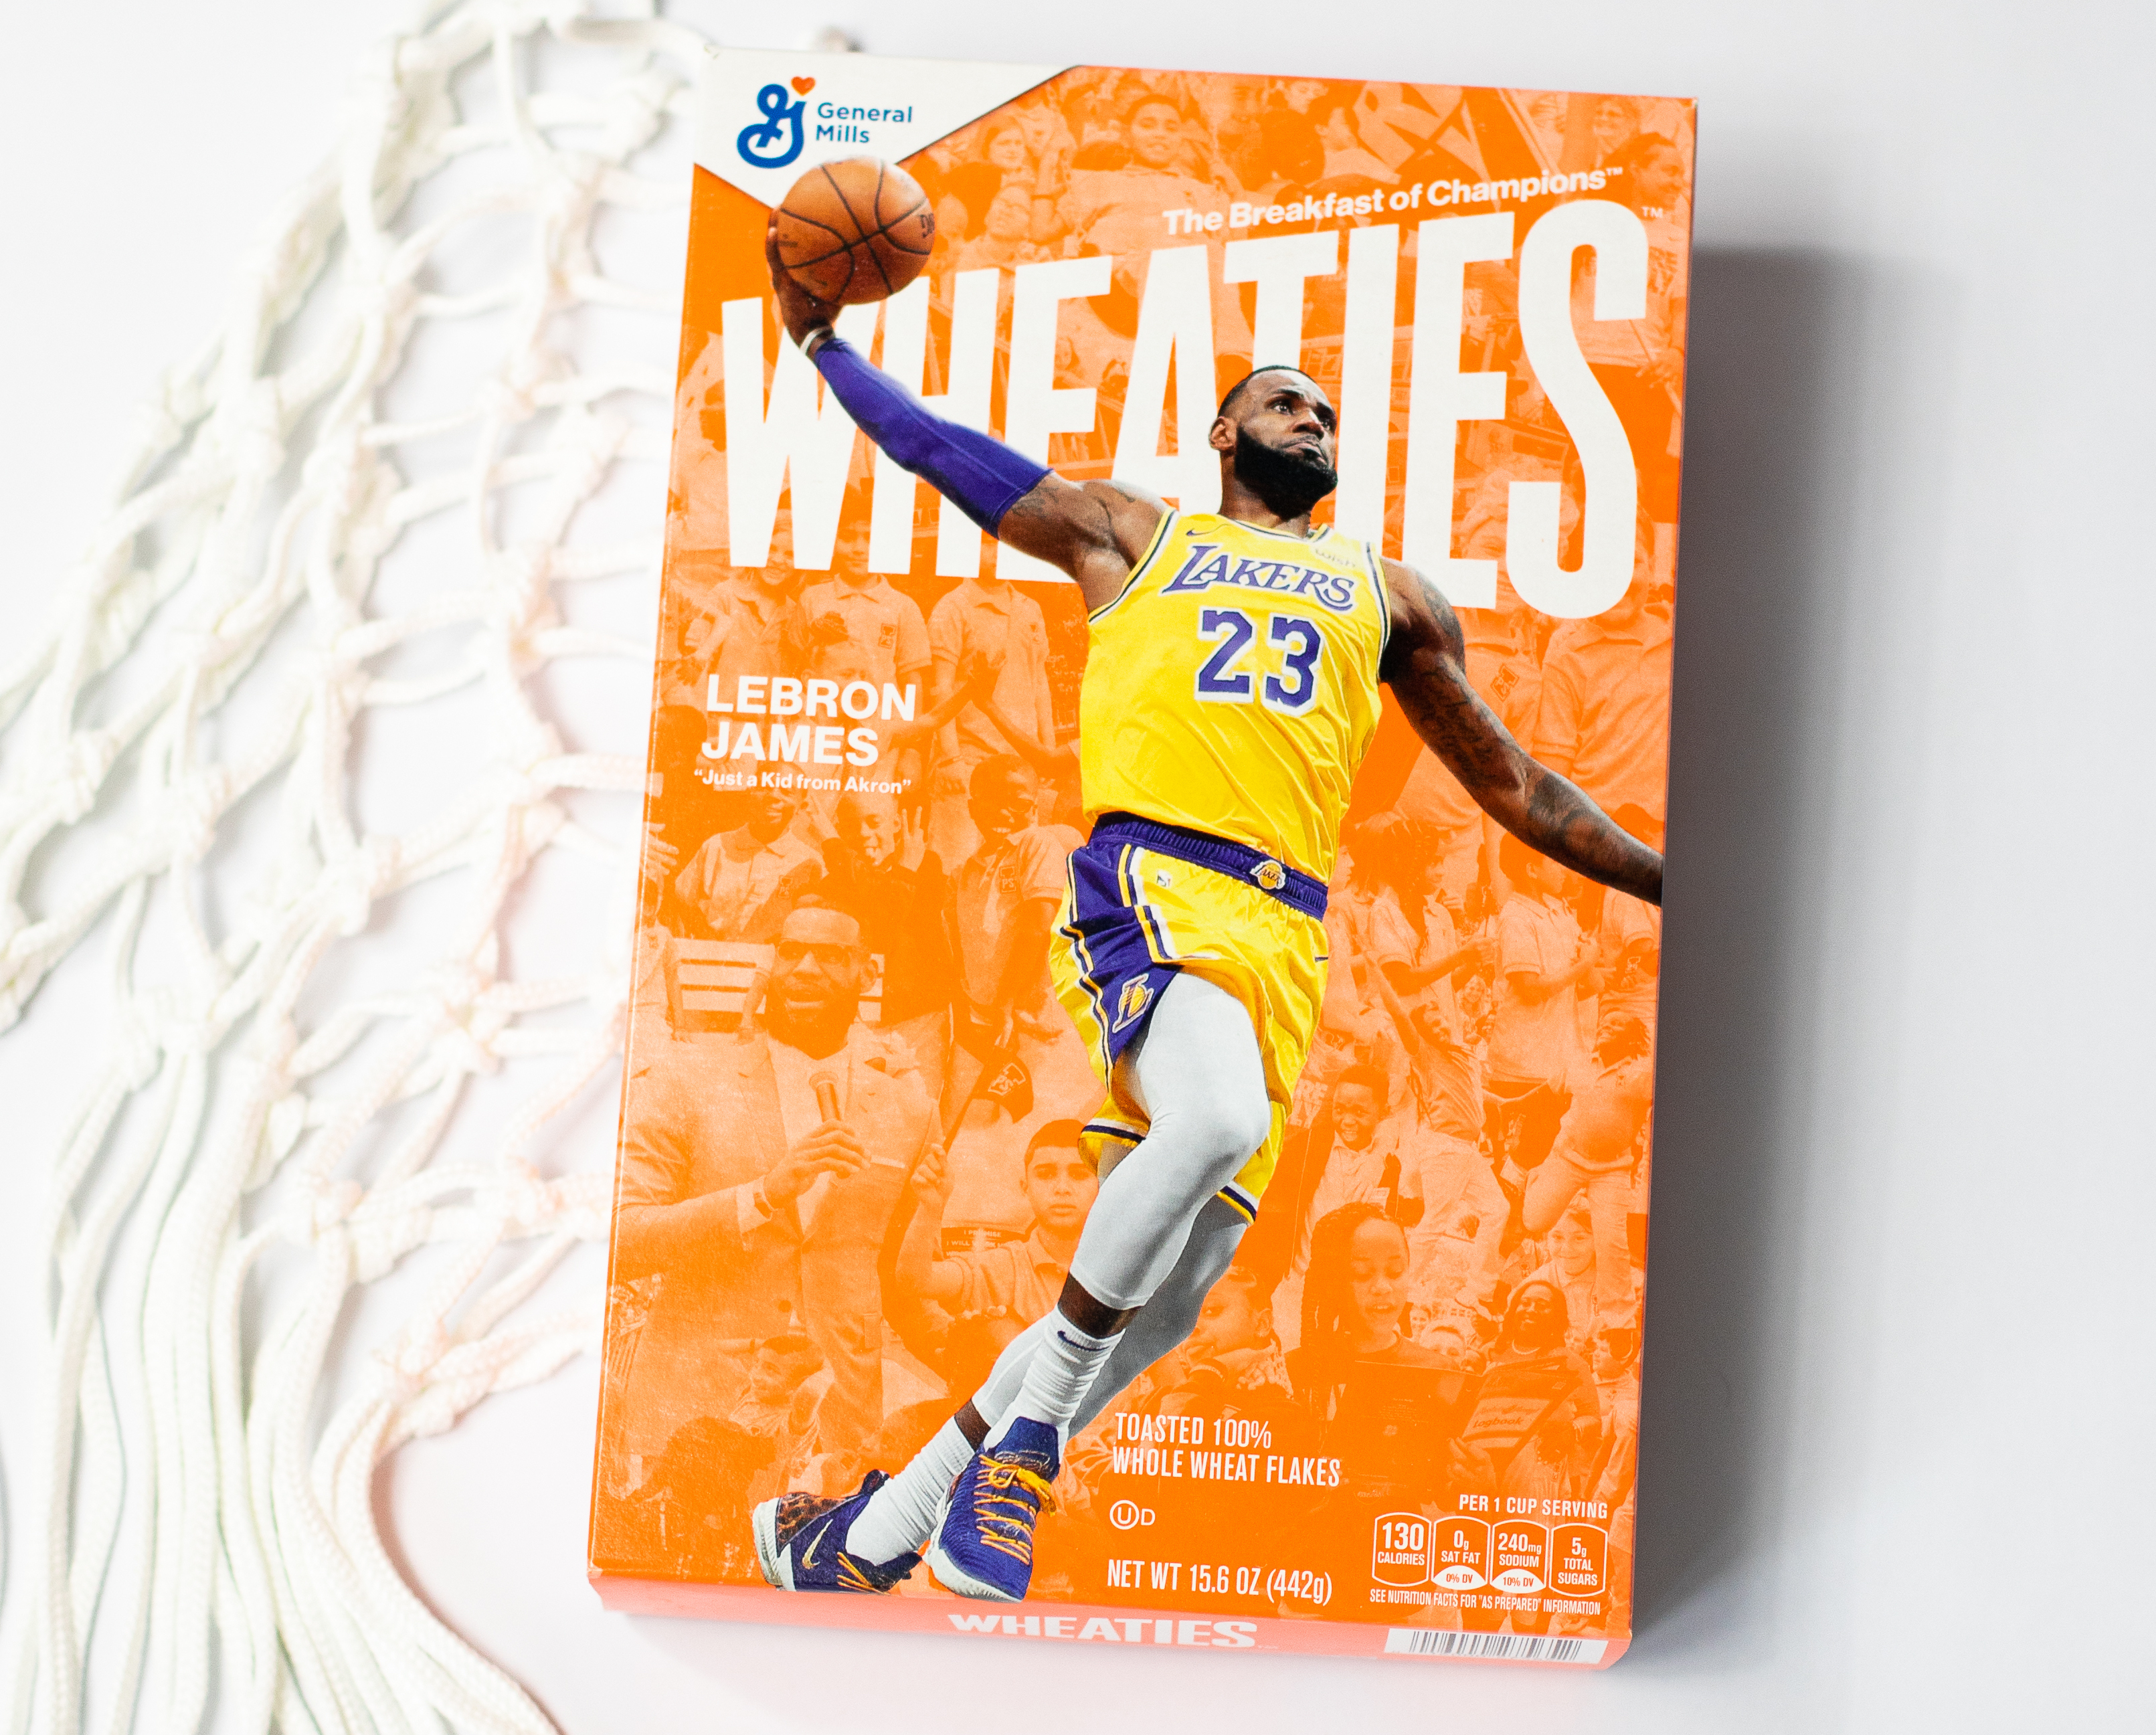 grace the iconic Wheaties cereal box 